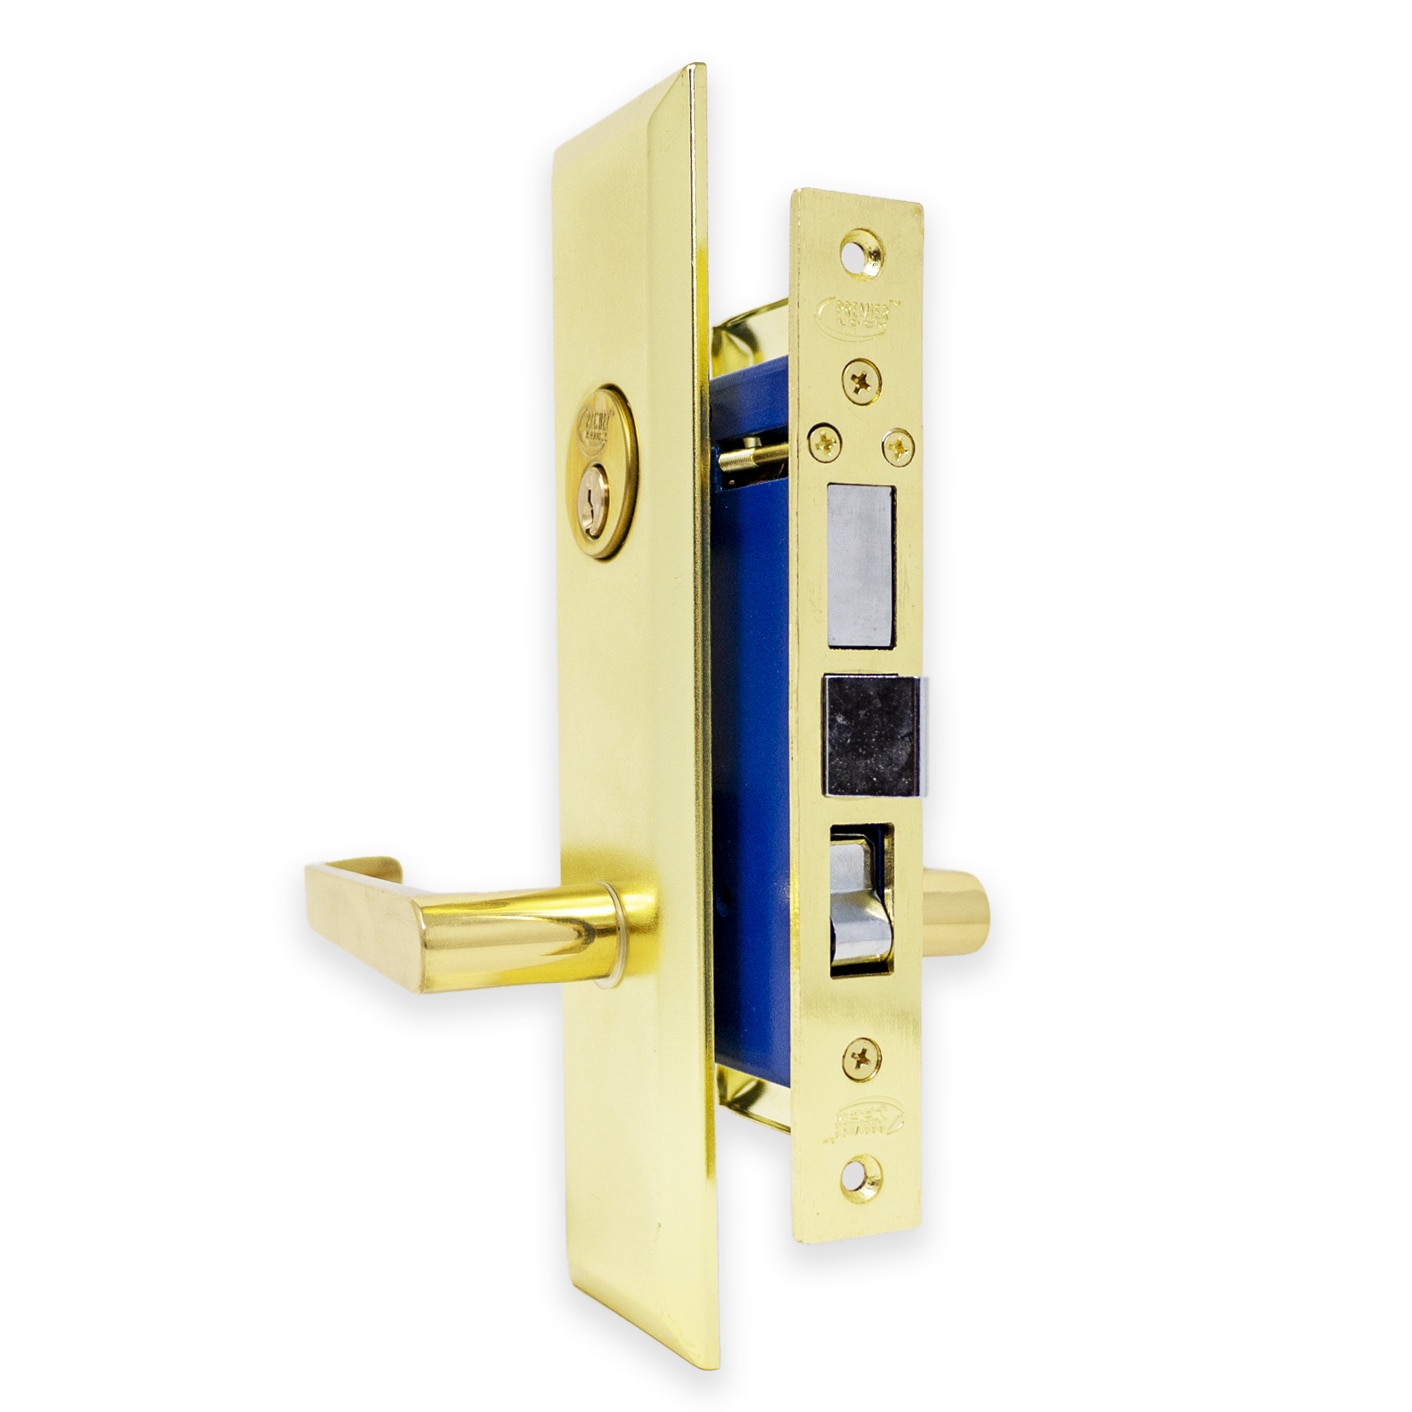 lock - How to remove this door knob on the mortise lockset? - Home  Improvement Stack Exchange